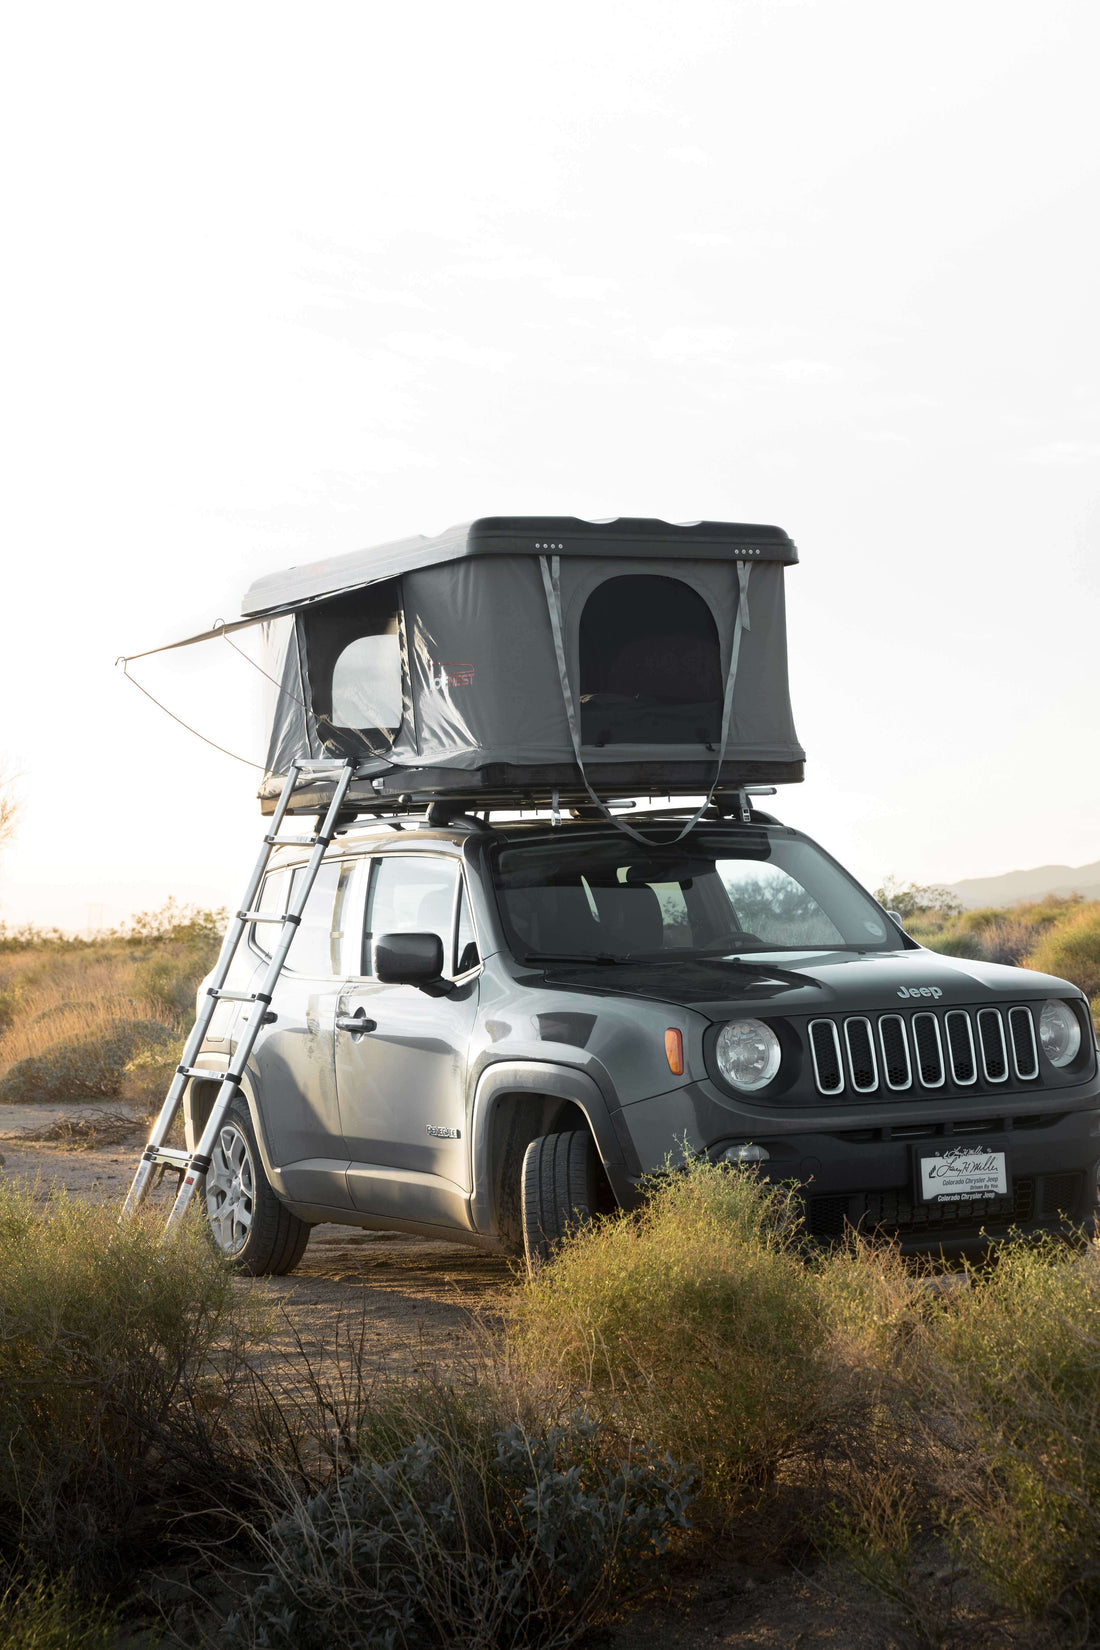 Roofnest Blog, top 10 holiday gifts for a roofnest owner|Roofnest blog why Roofnest is the best rooftop tent|Roofnest blog why Roofnest is the best rooftop tent|Roofnest blog why Roofnest is the best rooftop tent